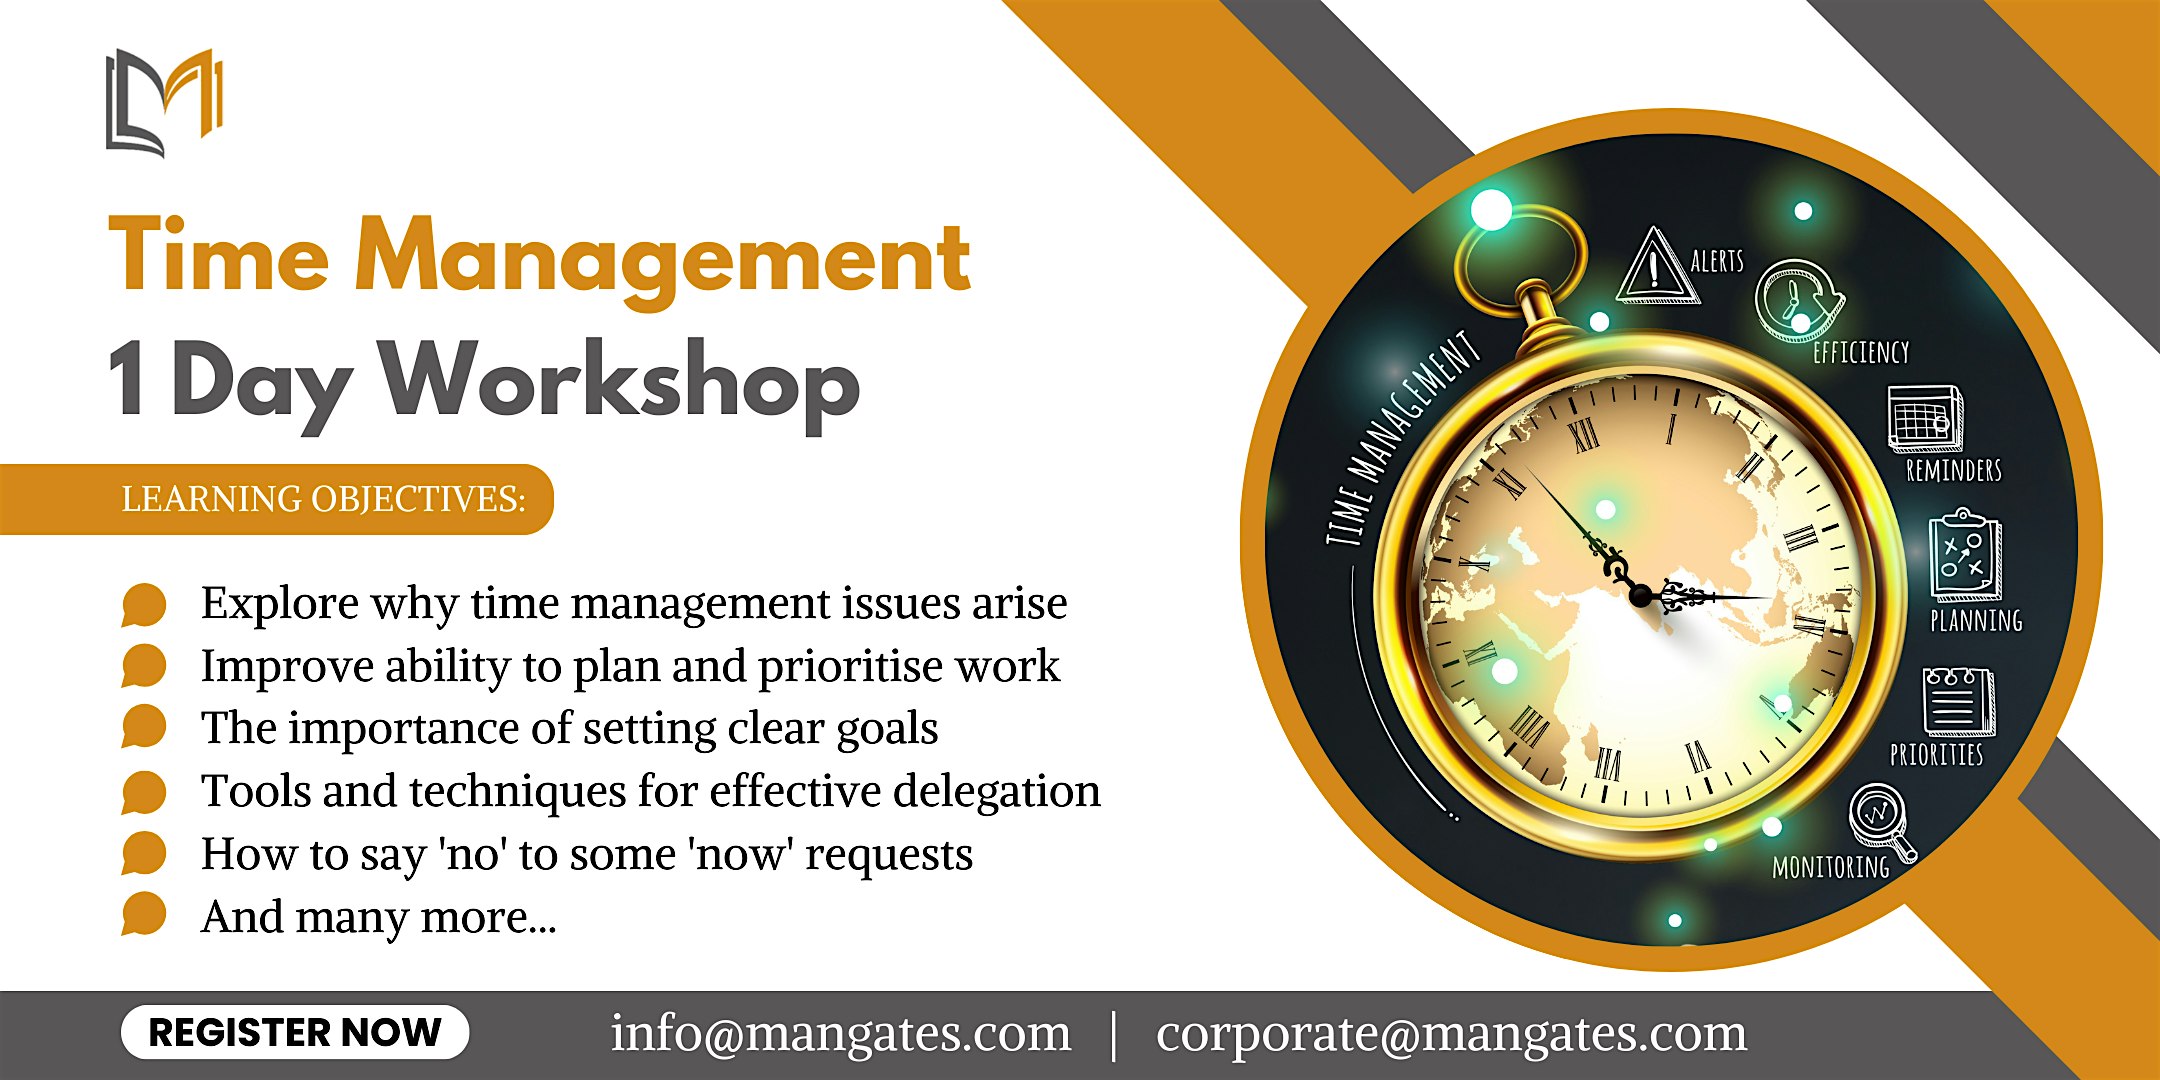 Time Management Mastery 1 Day Workshop in Waco, TX